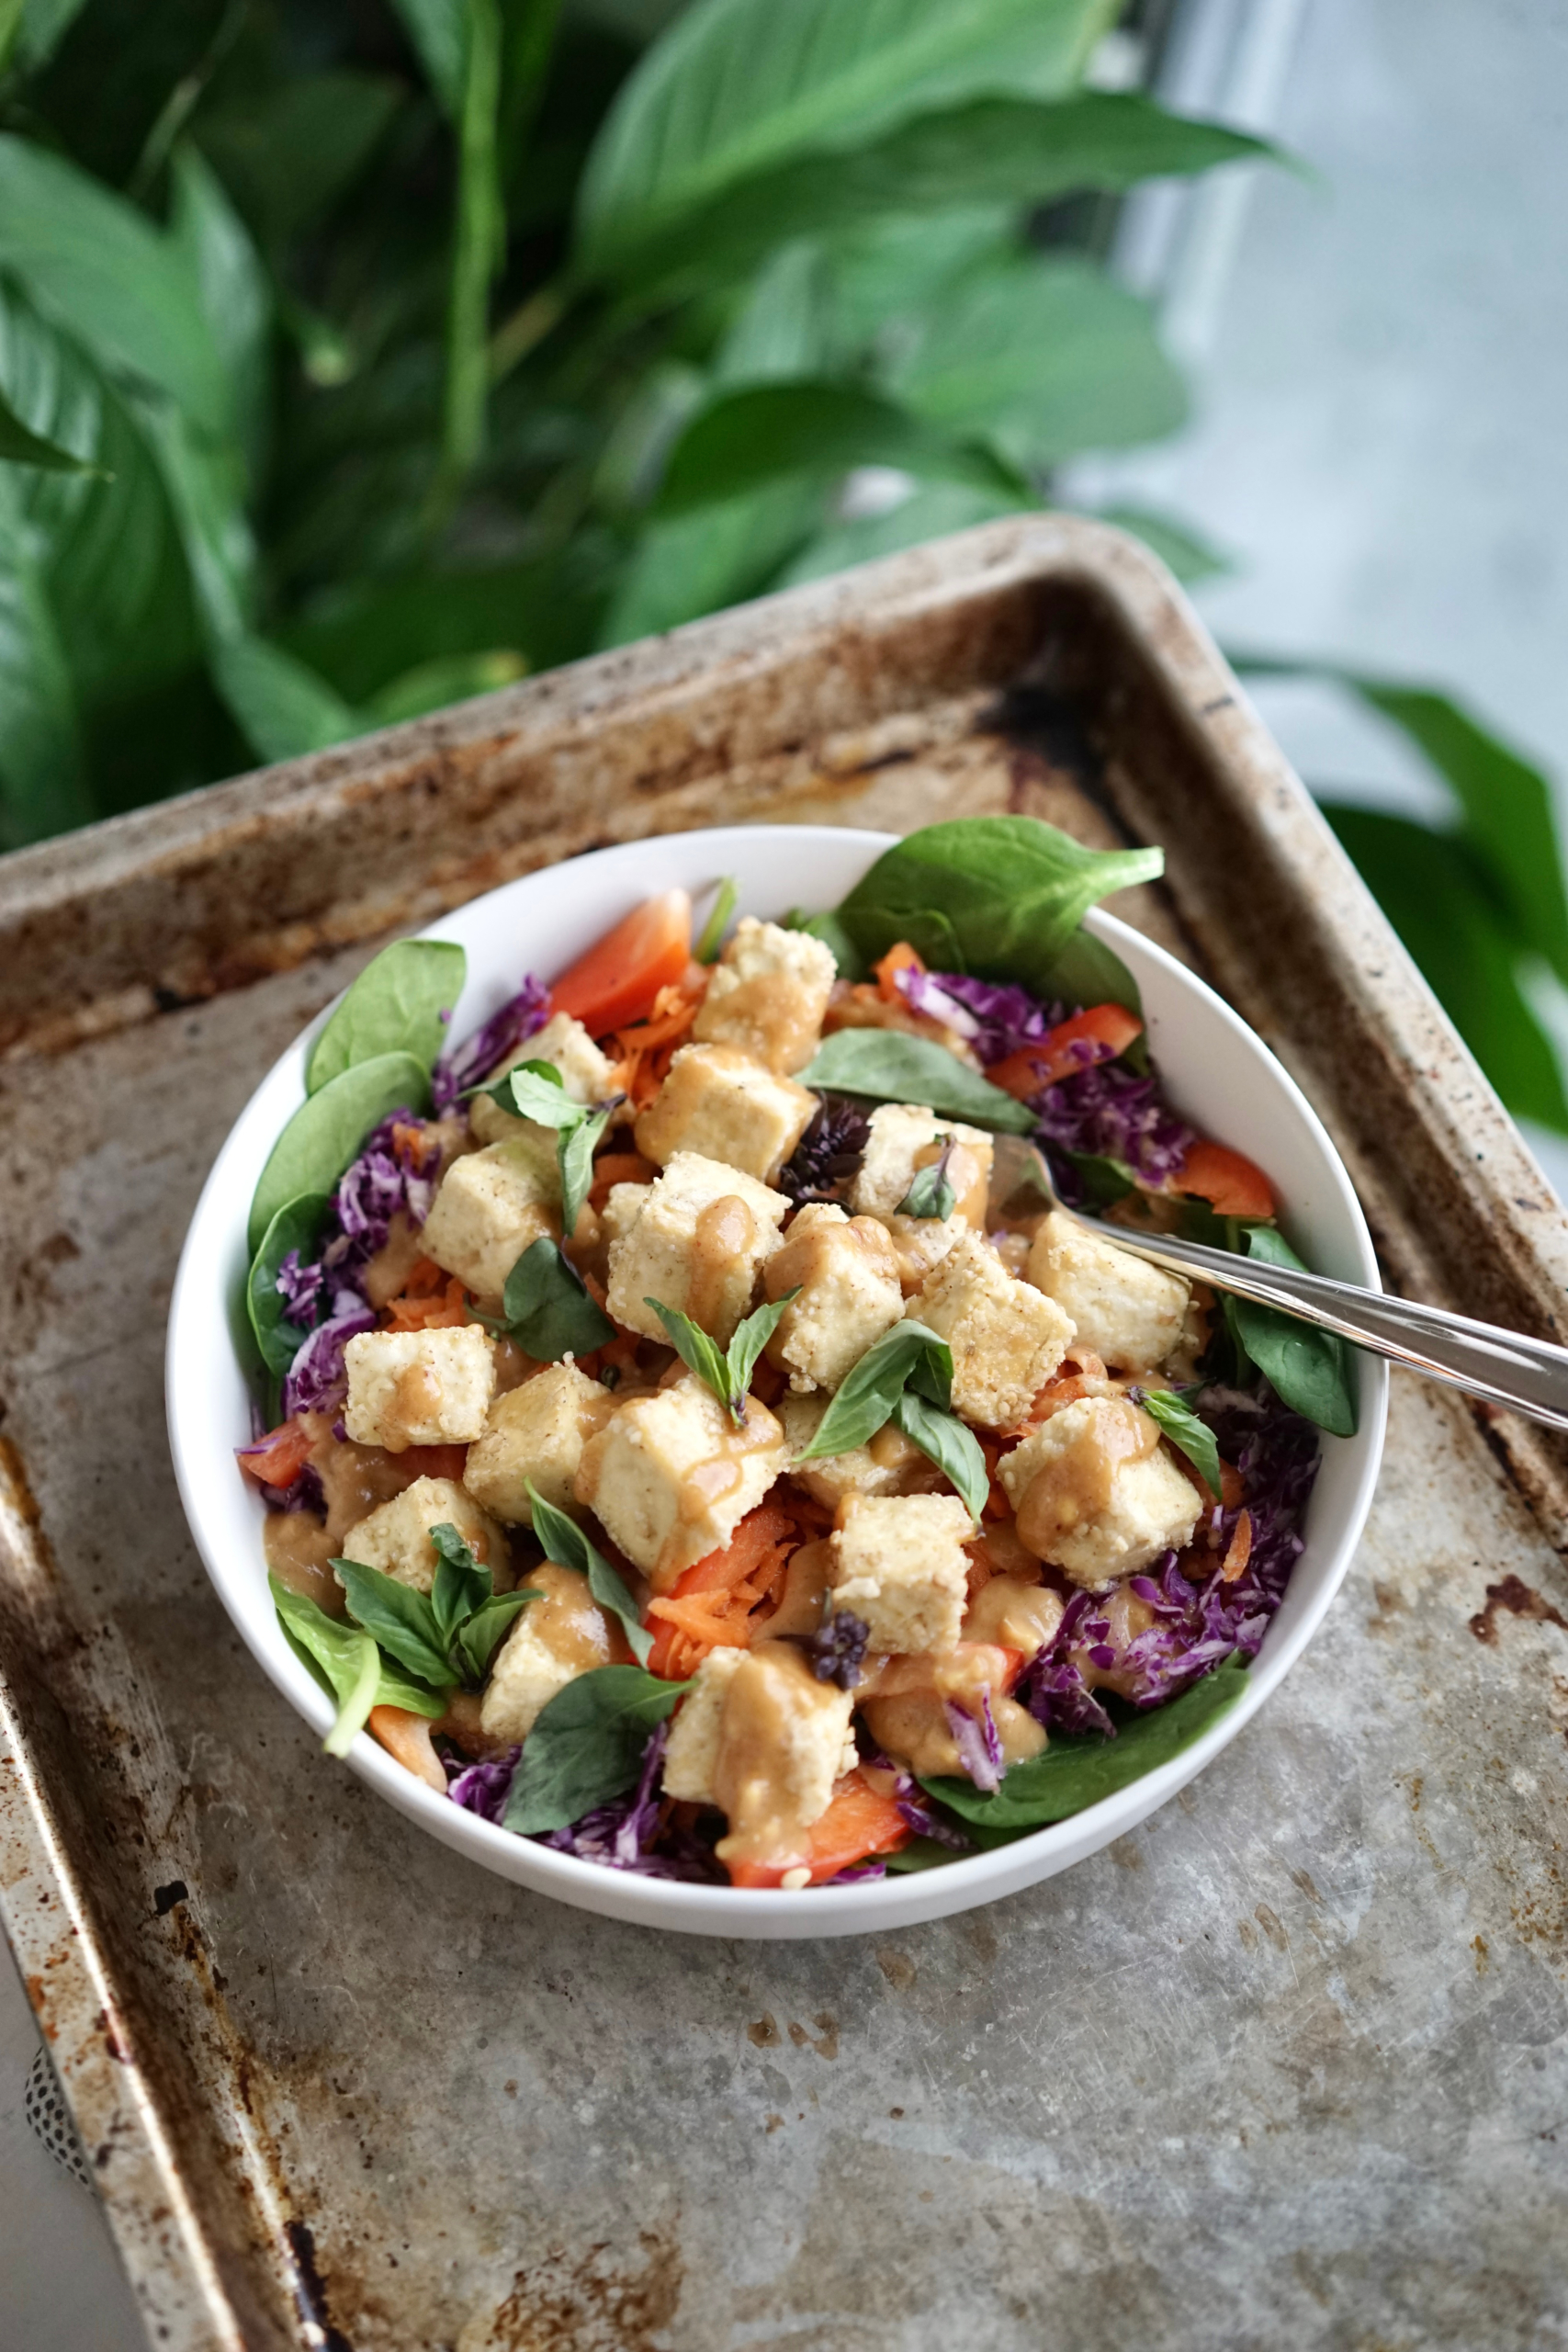 Crispy Baked Tofu & Raw Veggies with Peanut Miso Sauce | Living Healthy in Seattle